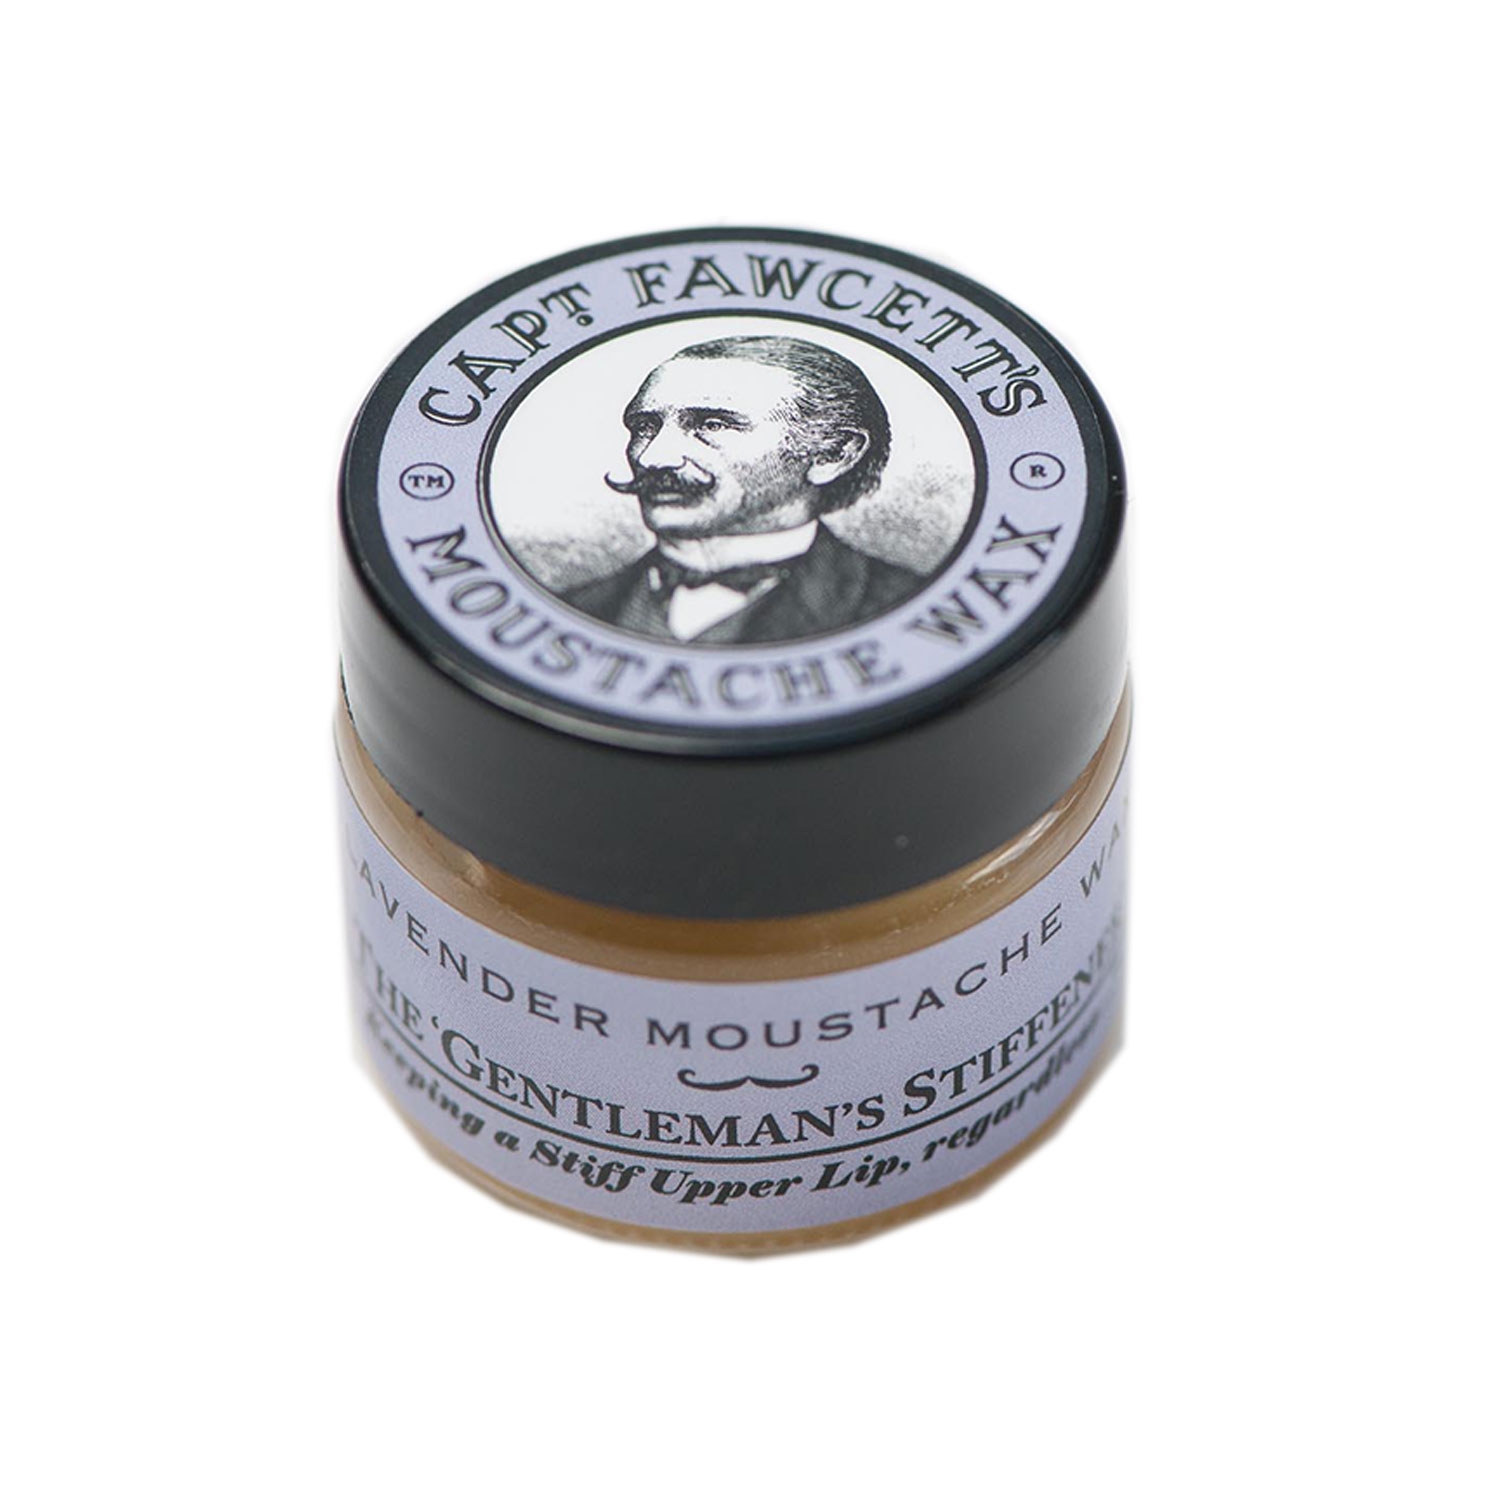 Product image from Capt. Fawcett Care - Lavender Moustache Wax